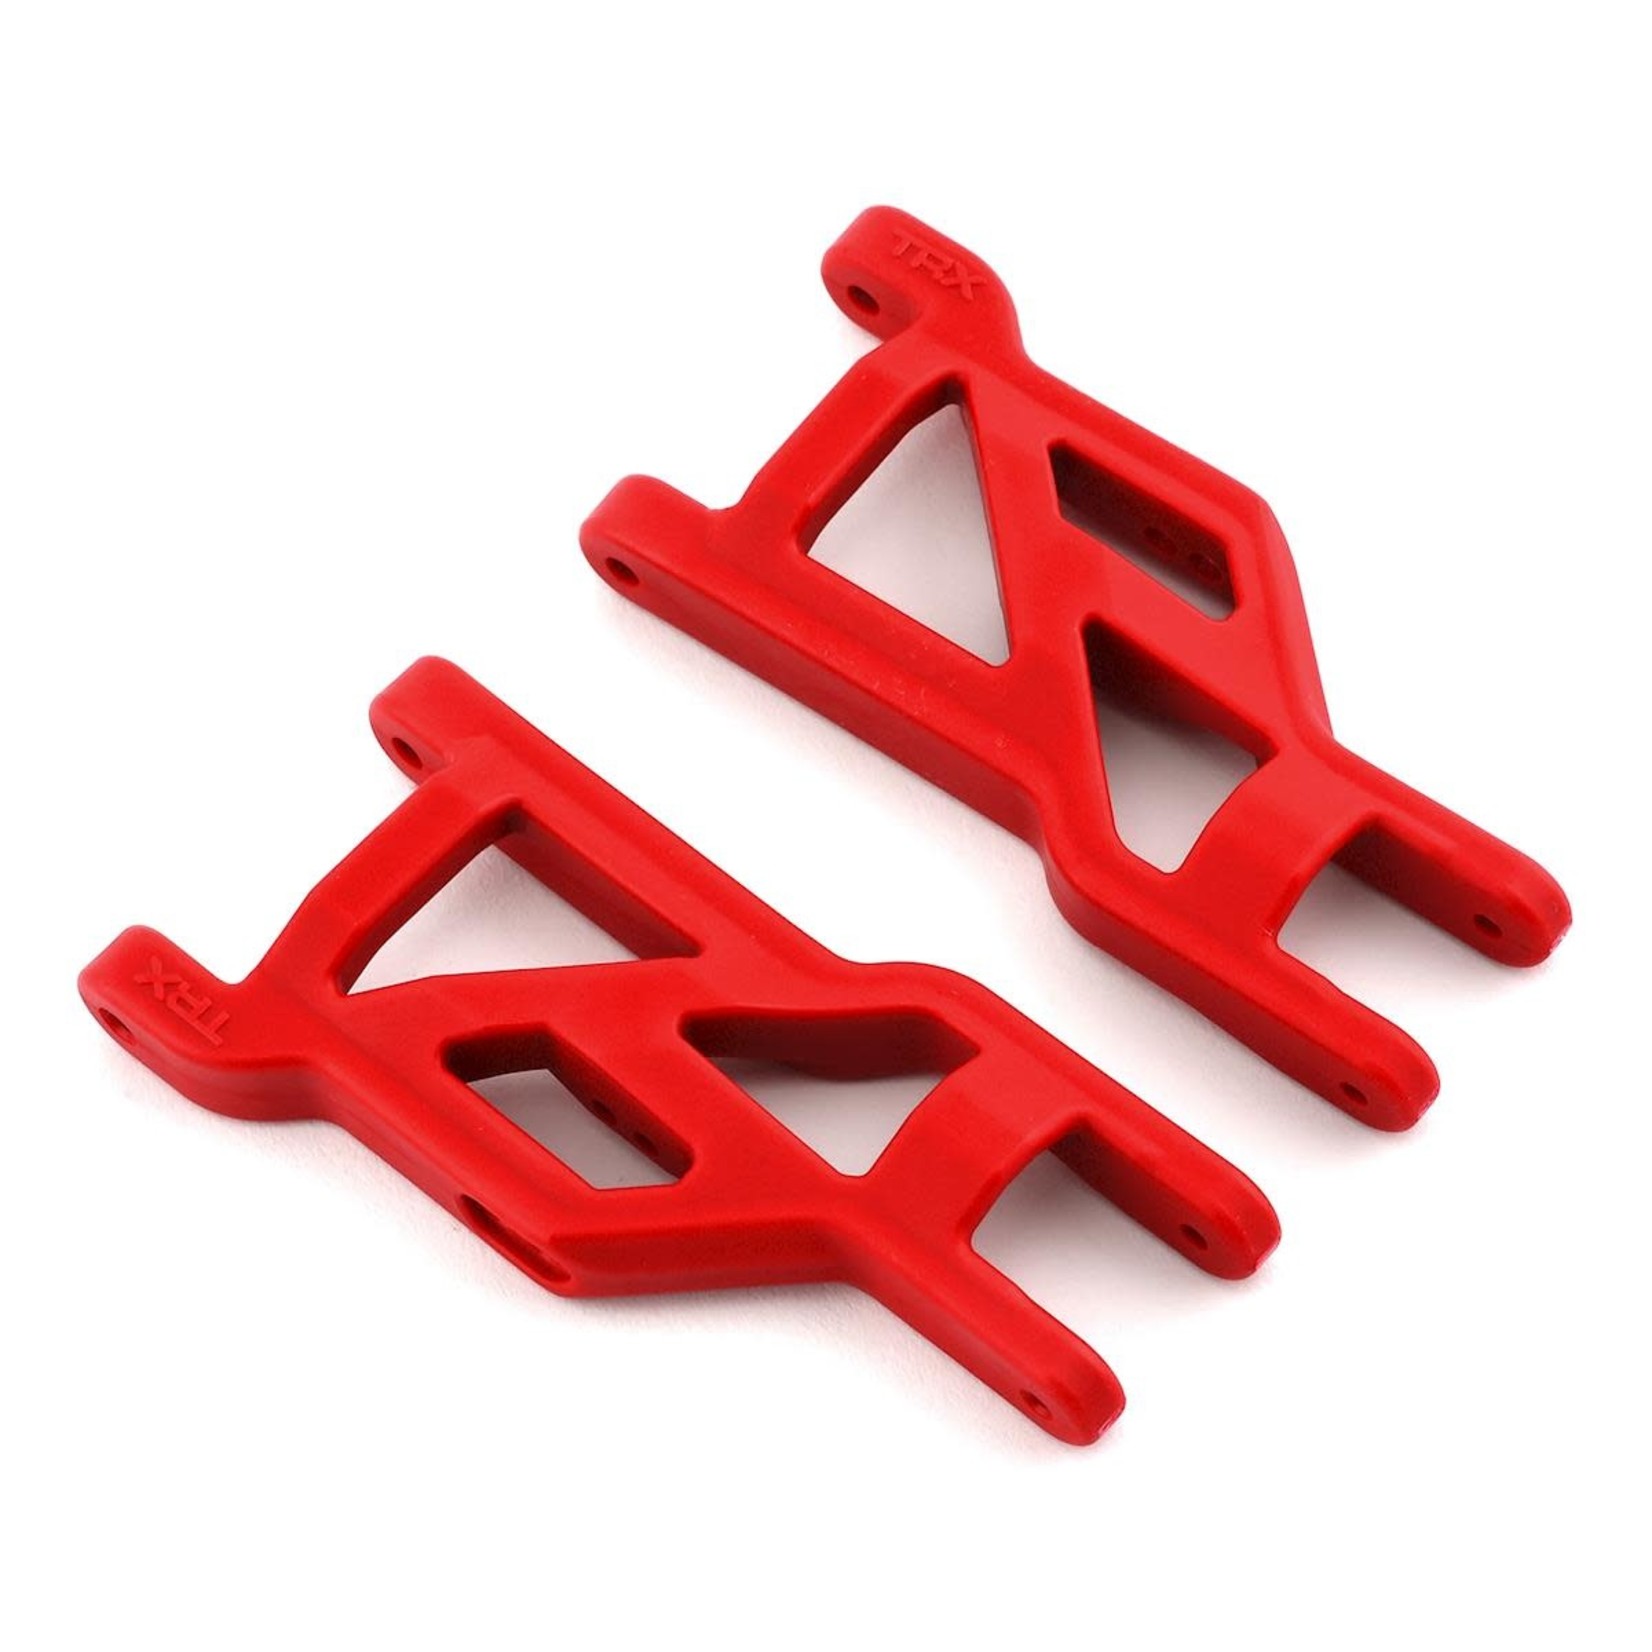 Traxxas Traxxas HD Cold Weather Front Suspension Arm Set (Red) #3631R